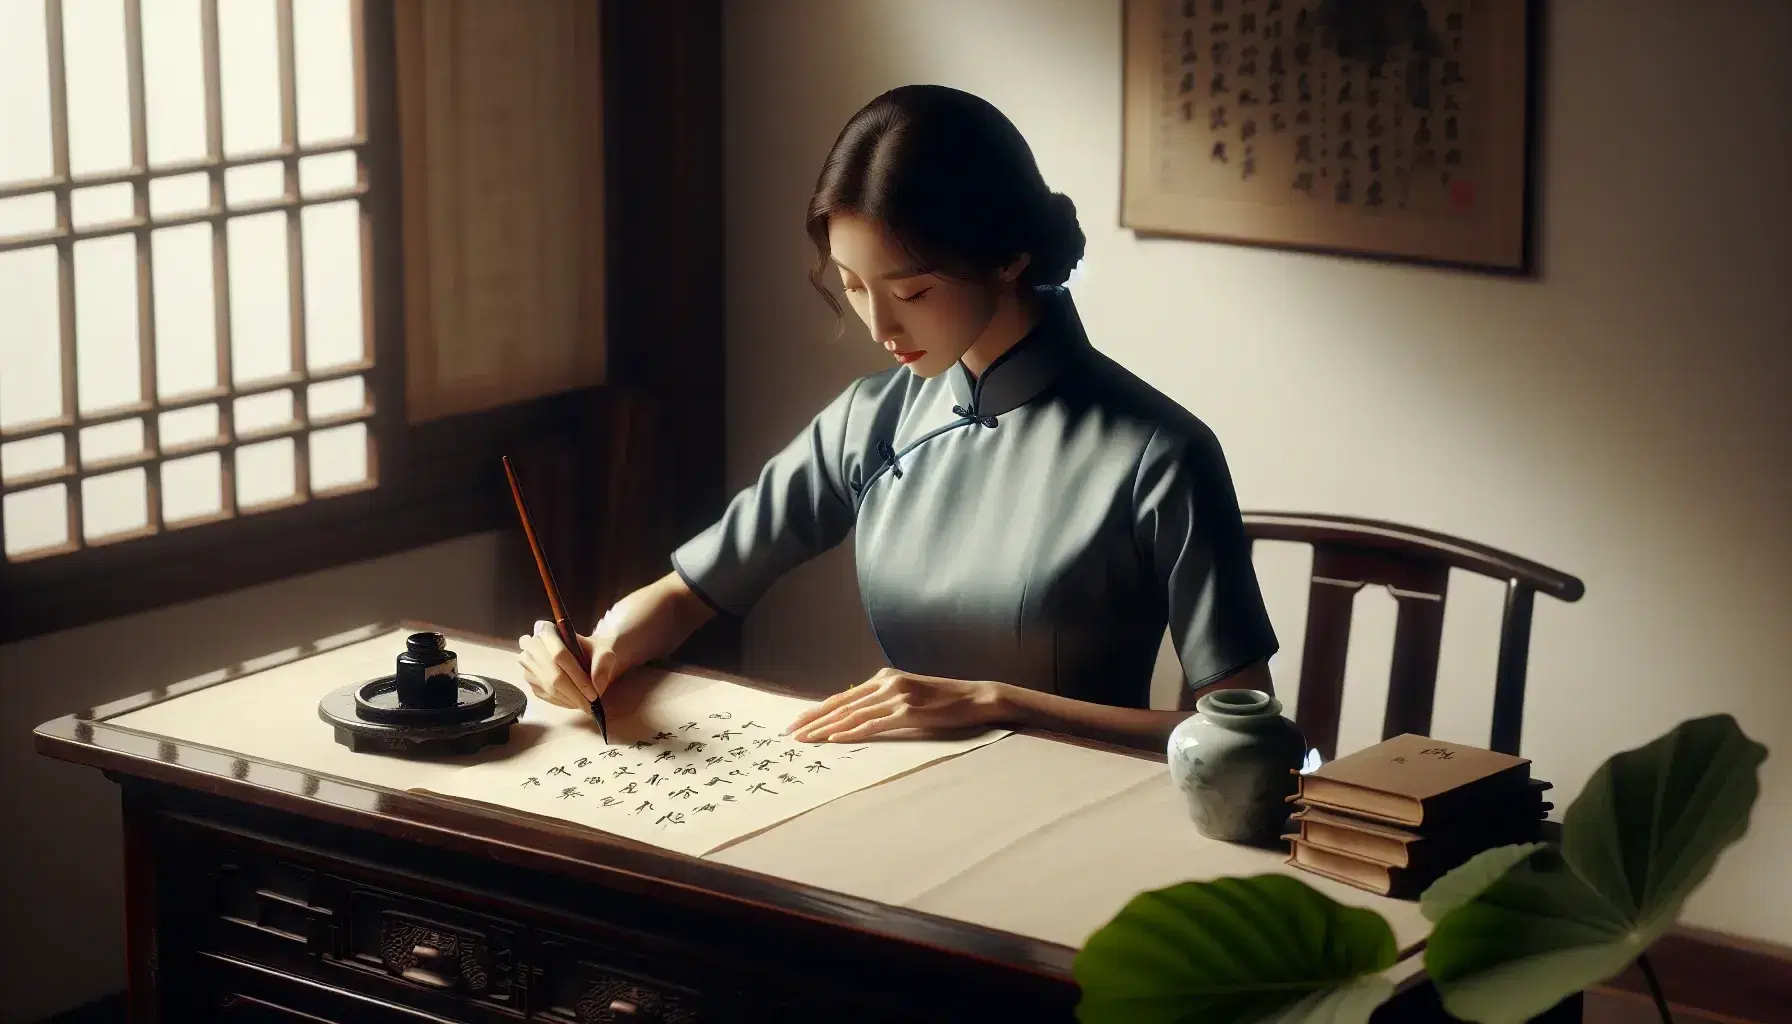 Chinese woman in blue qipao writing with brush on rice paper at traditional desk, with inkstone, ink stick, and porcelain water dropper nearby.